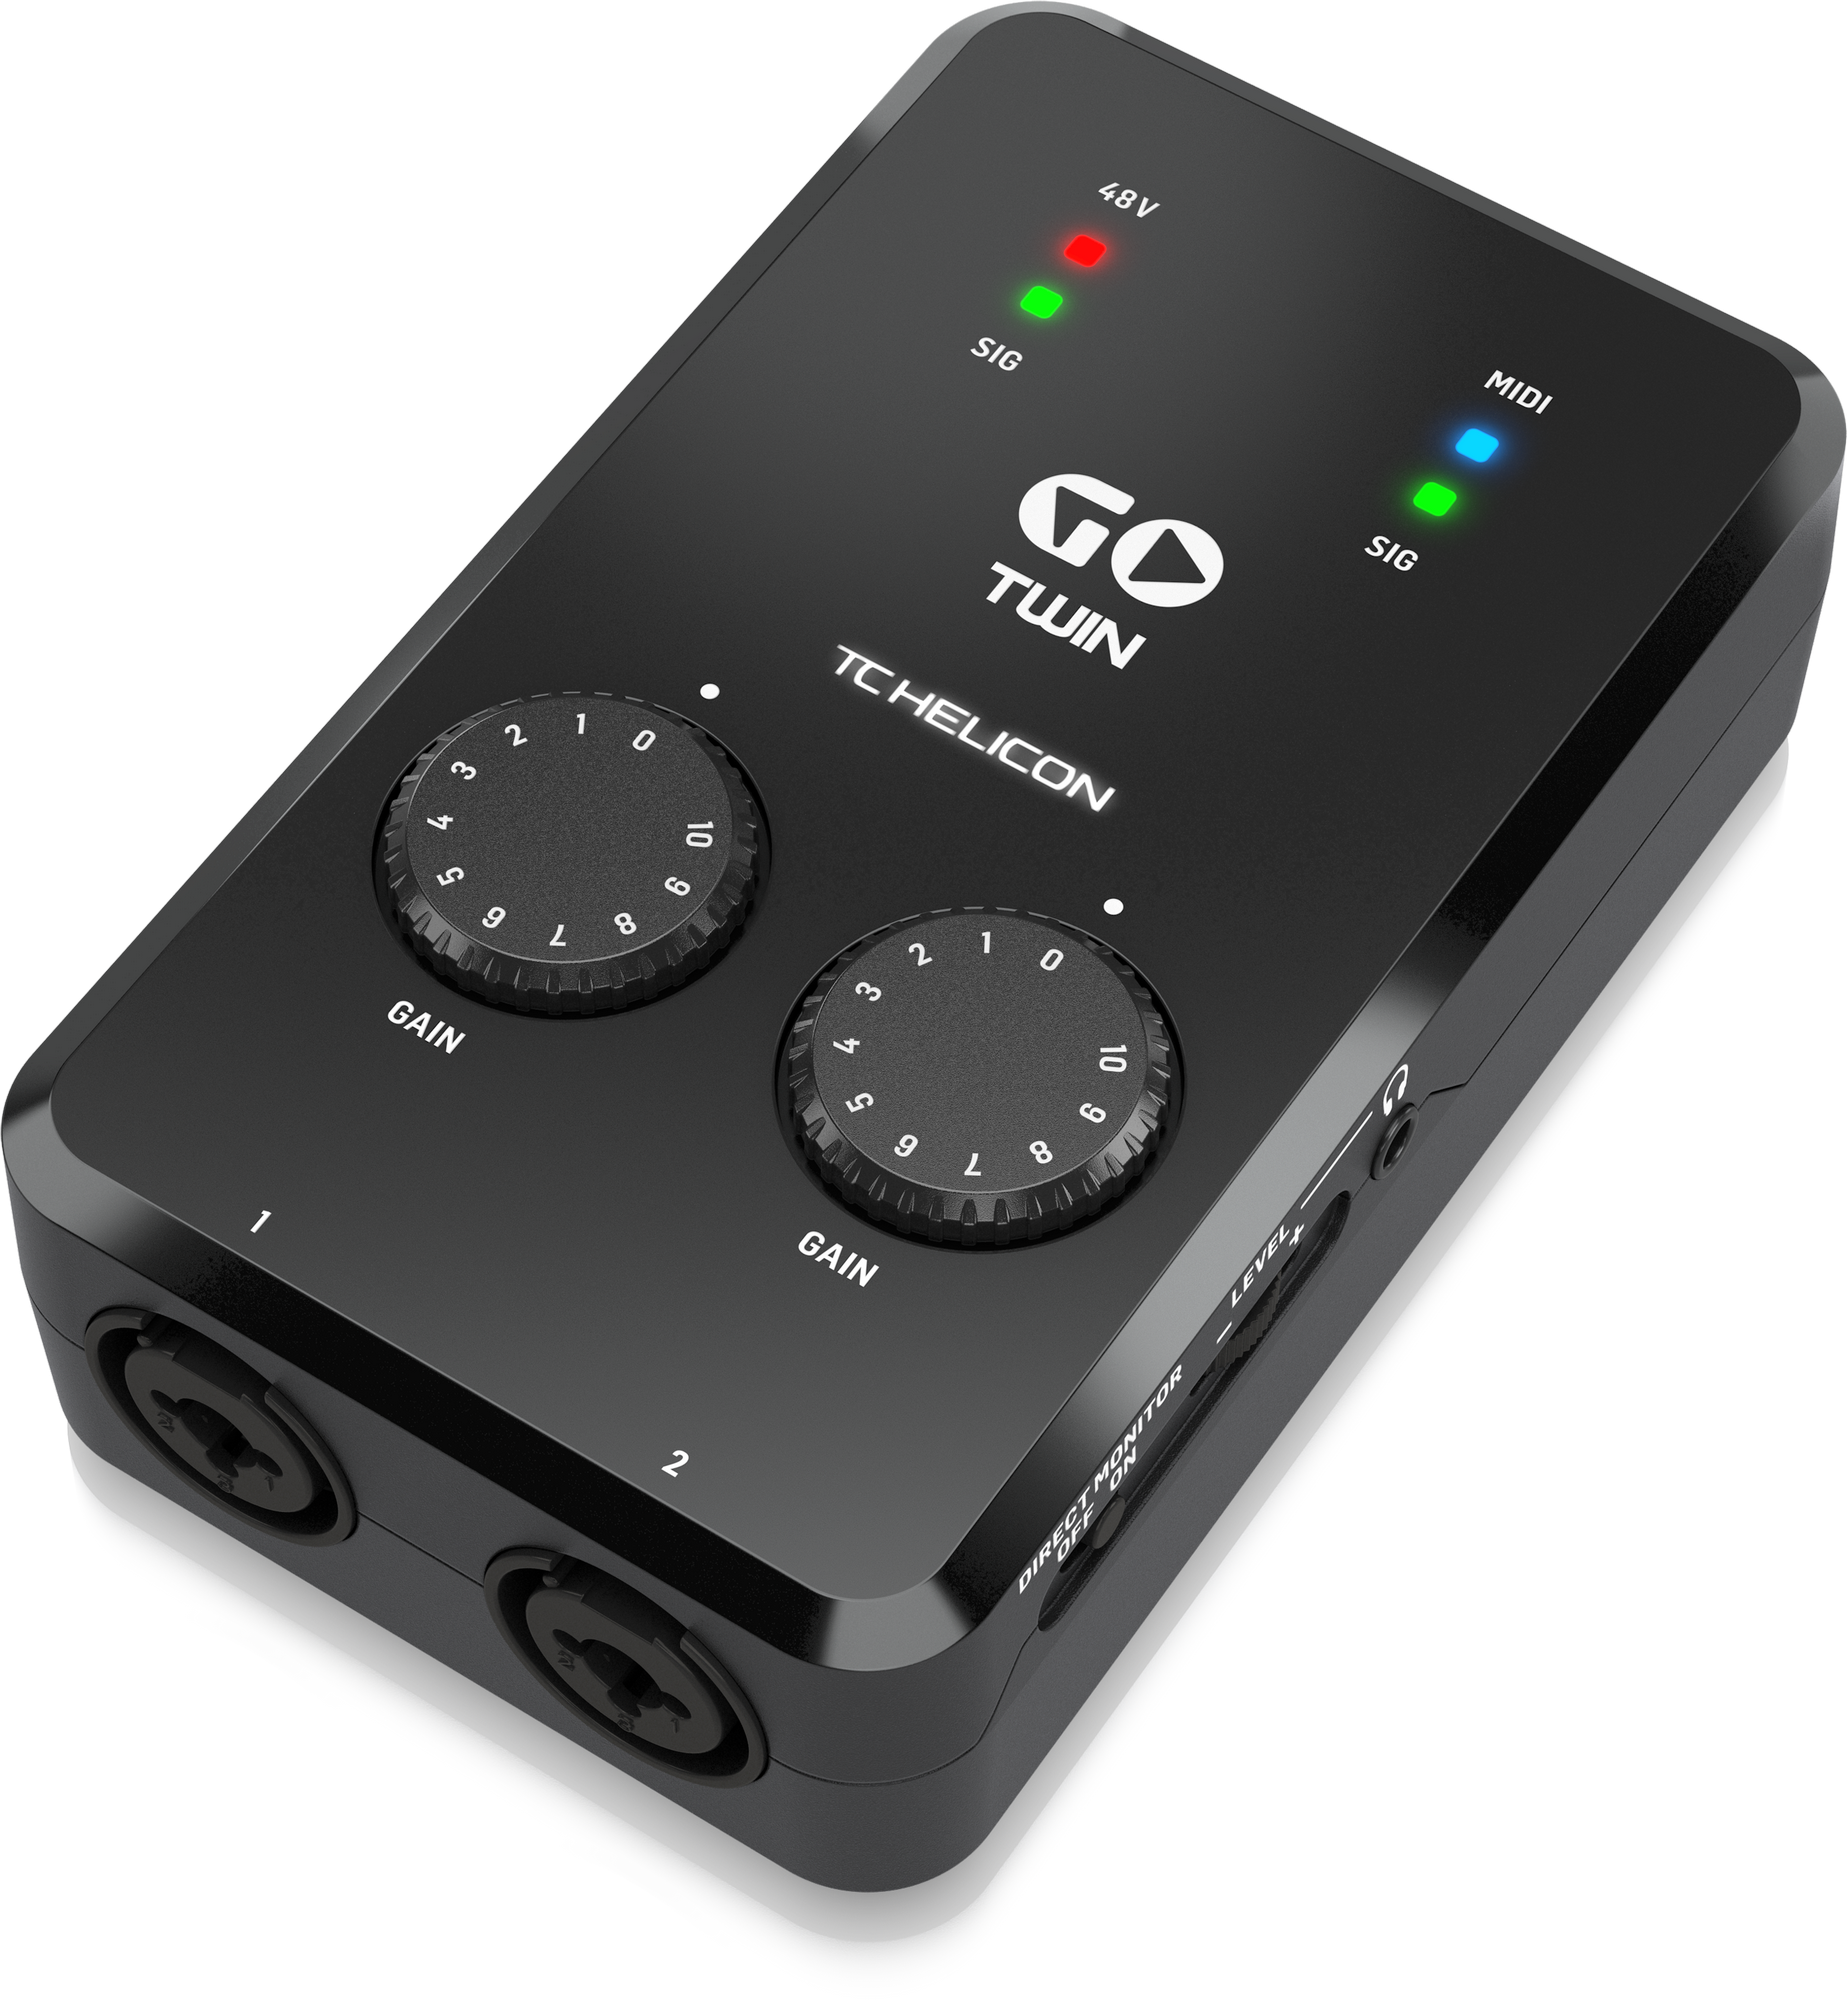 TC HELICON GO TWIN HIGH-DEFINITION 2 CHANNEL AUDIO/MIDI INTERFACE FOR MOBILE DEVICES, TC HELICON, AUDIO INTERFACE, tc-helicon-audio-interface-go-twin, ZOSO MUSIC SDN BHD